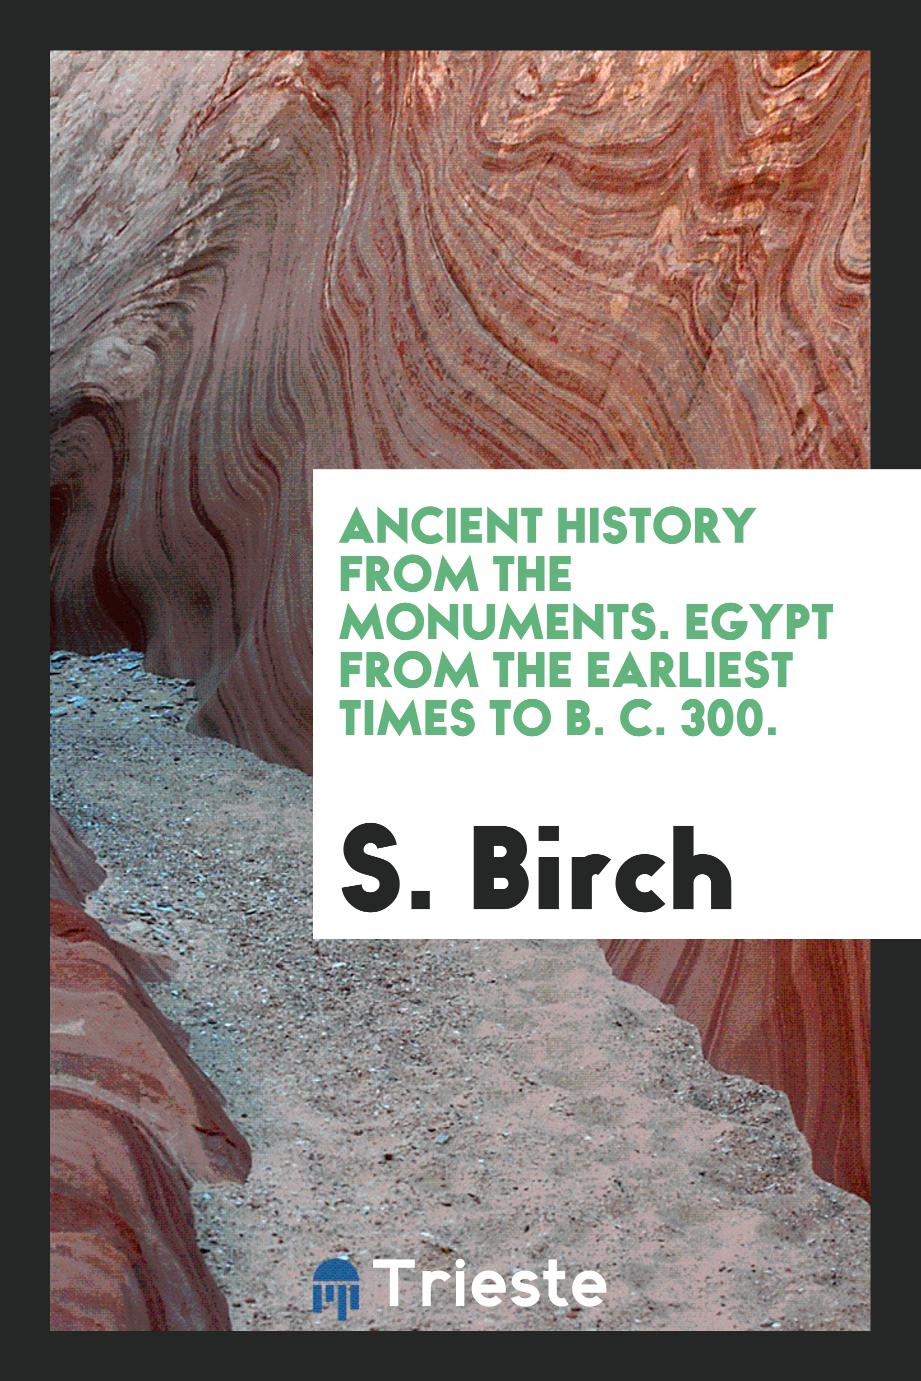 Ancient History from the Monuments. Egypt from the Earliest Times to B. C. 300.